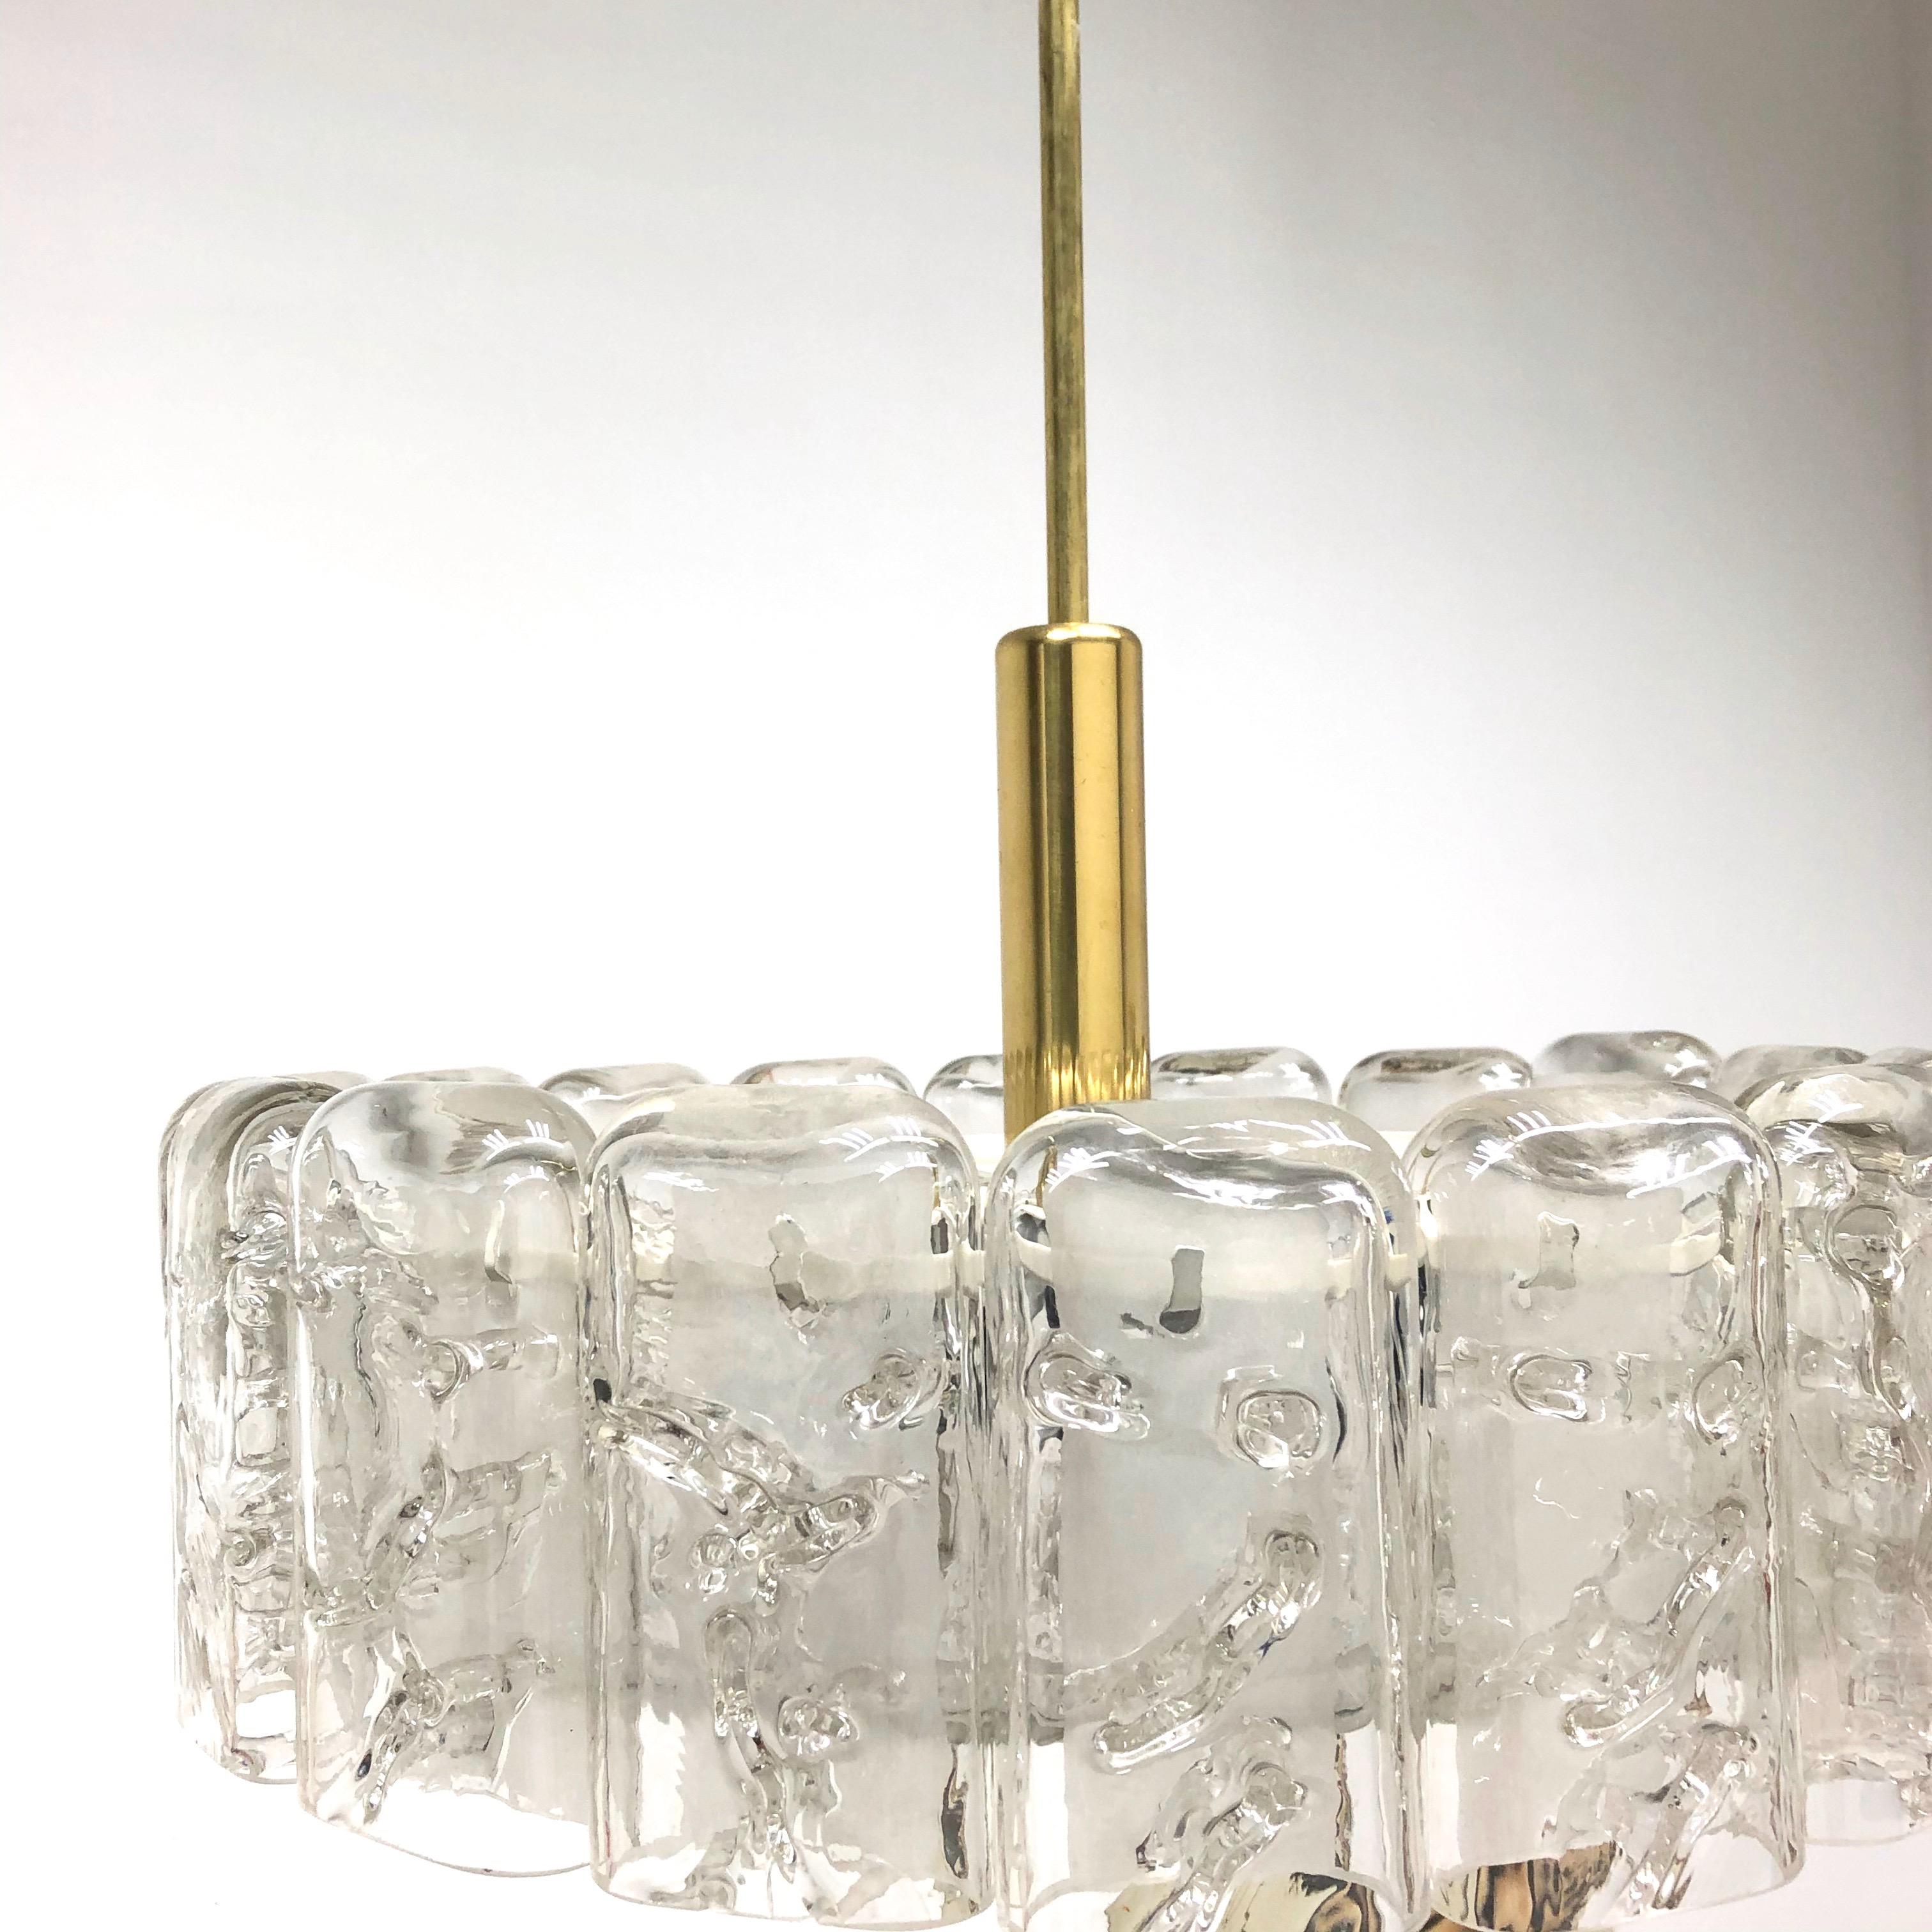 Mid-20th Century Mid-Century Modern Chandelier in Frosted and Textured Glass by Doria Vintage